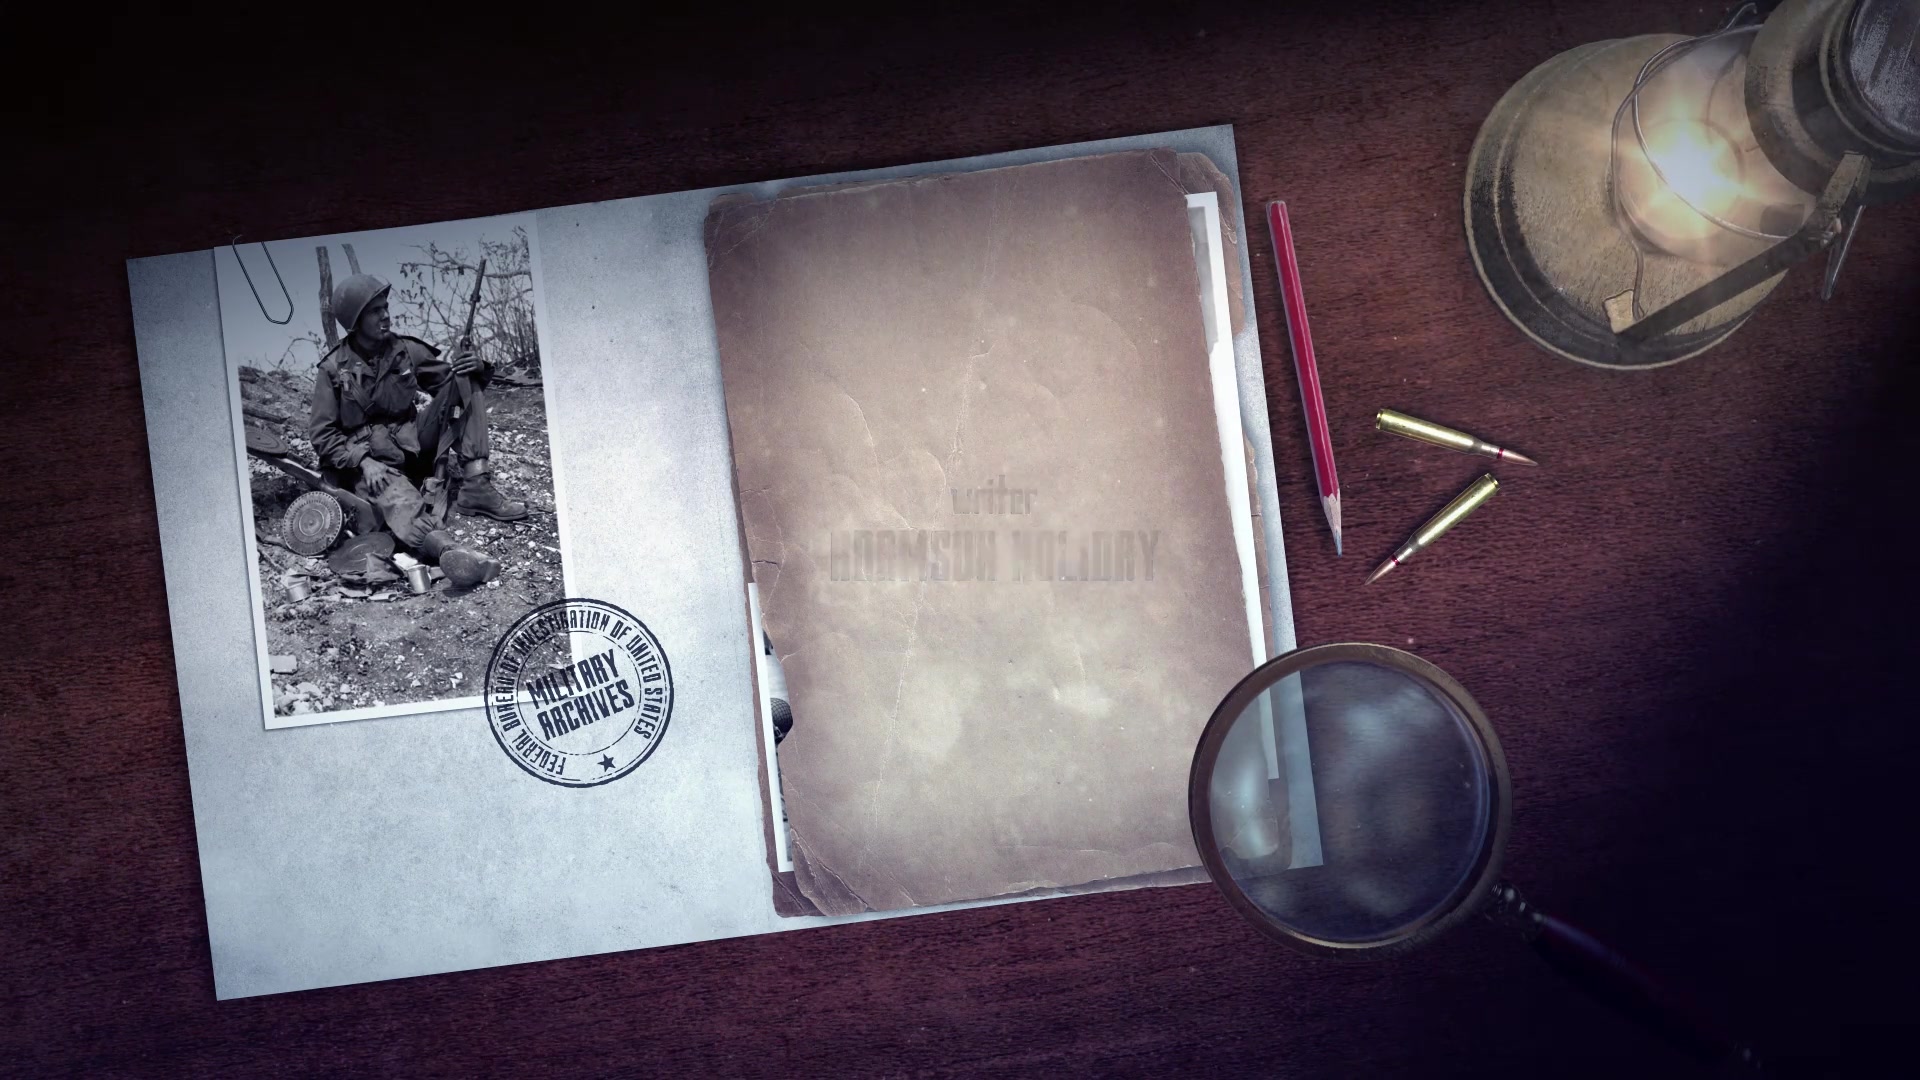 Military Archive Packages - Download Videohive 19525544